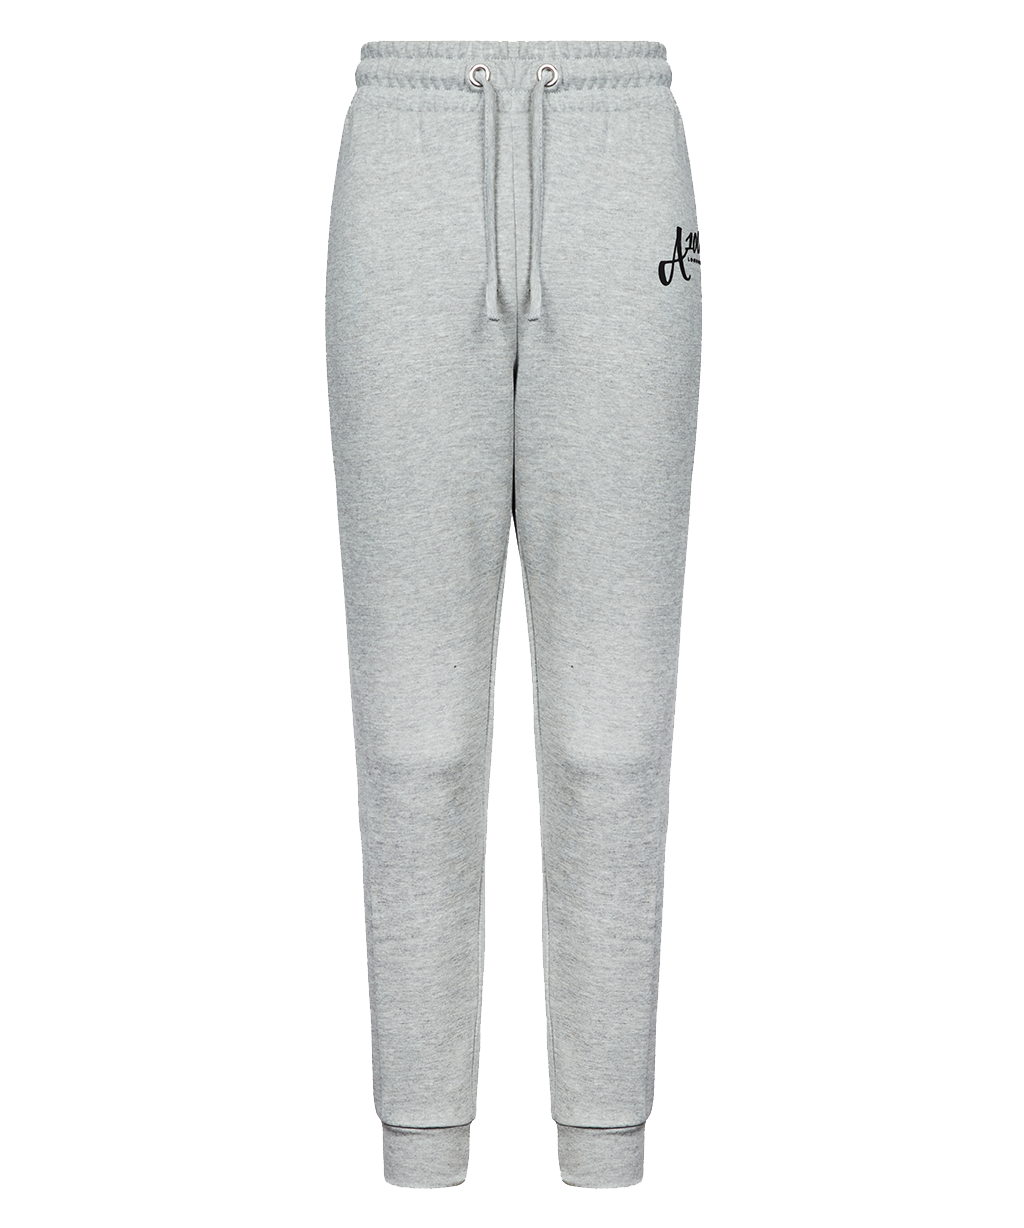 Women's Fitted Joggers